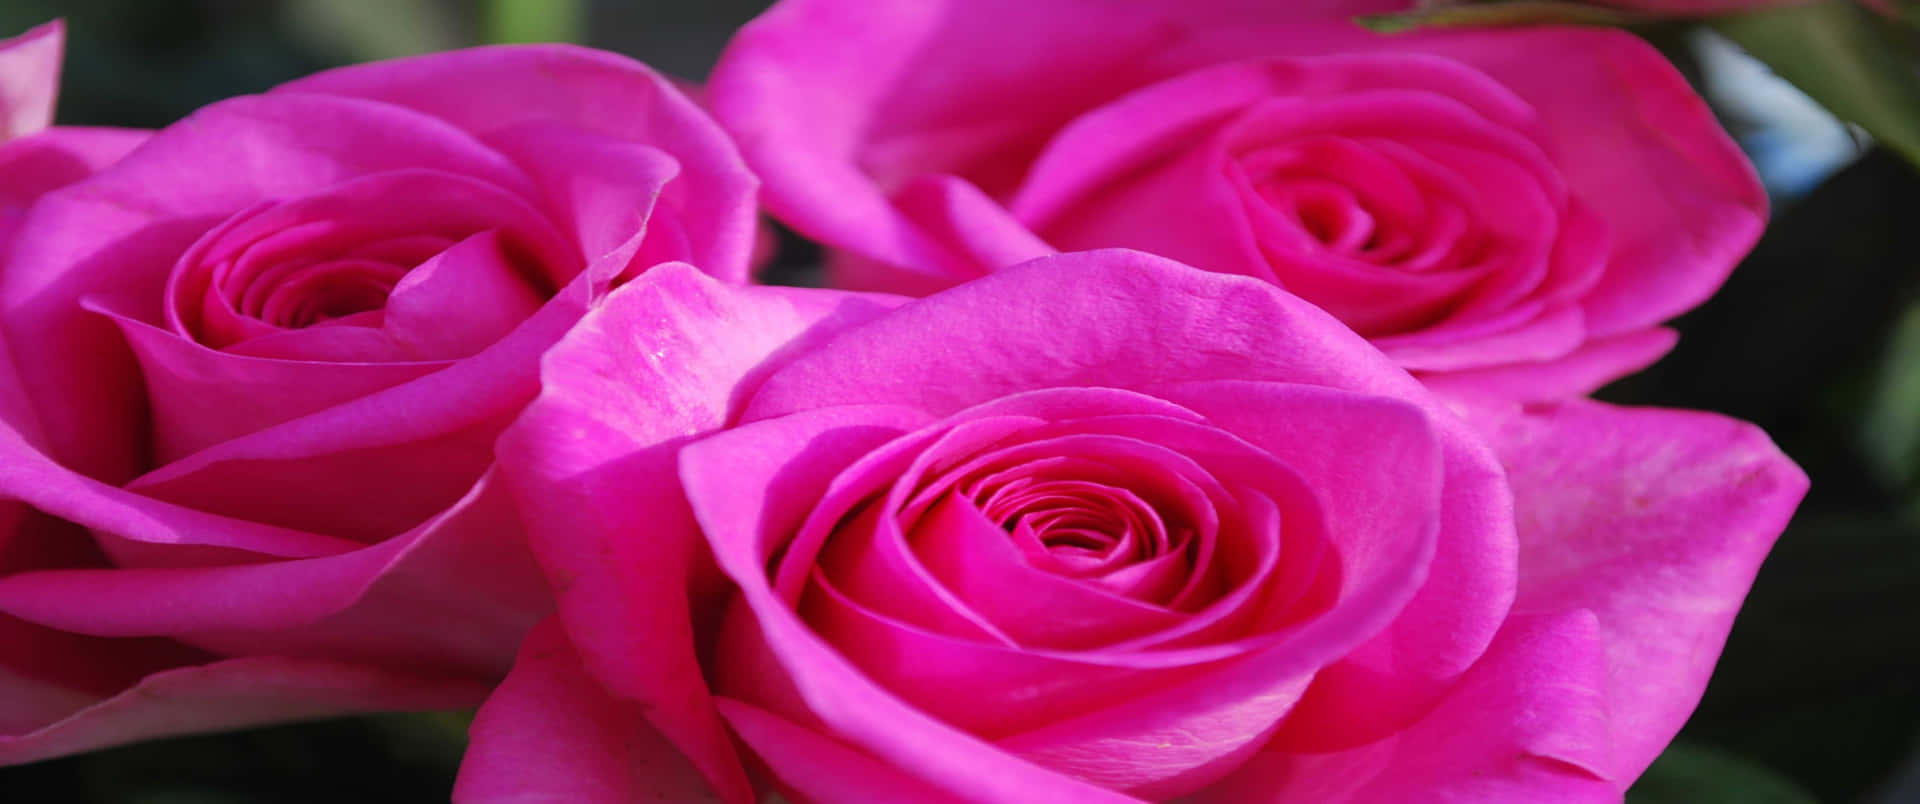 Download A bouquet of soft pink roses | Wallpapers.com